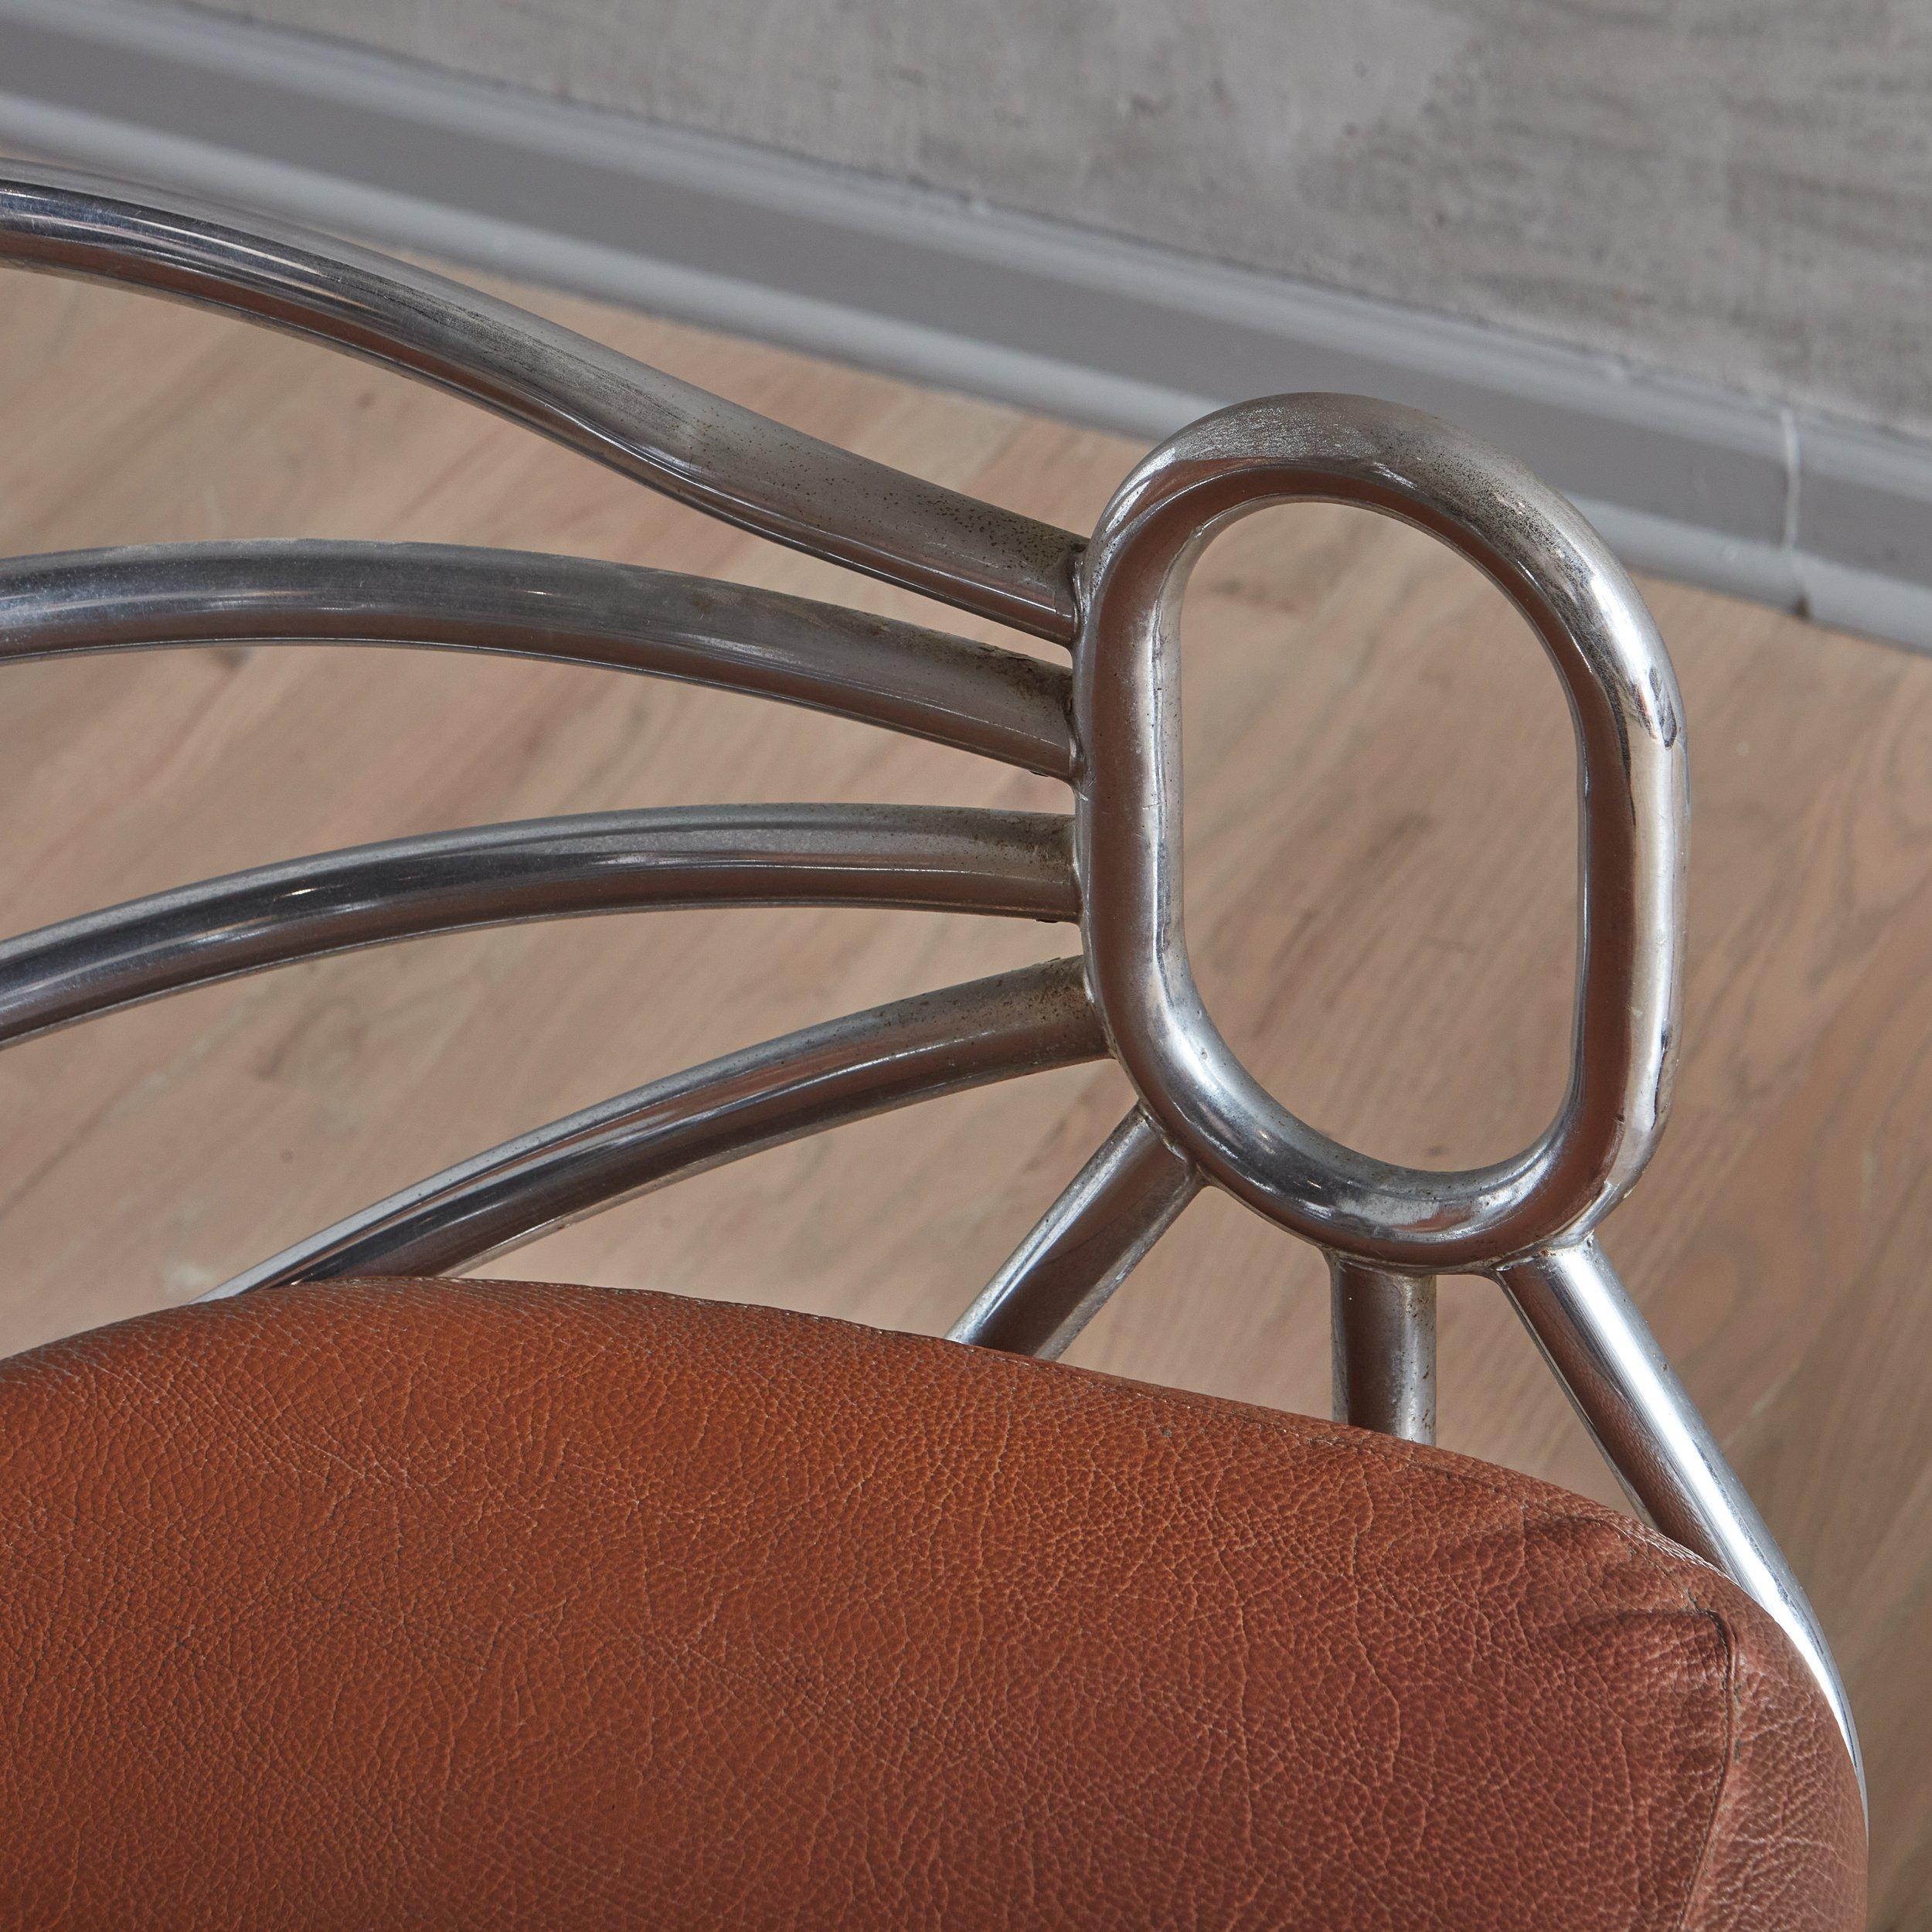 Metal Chrome Swivel Desk Chair in Brown Leather, Italy 1960s - 2 Available For Sale